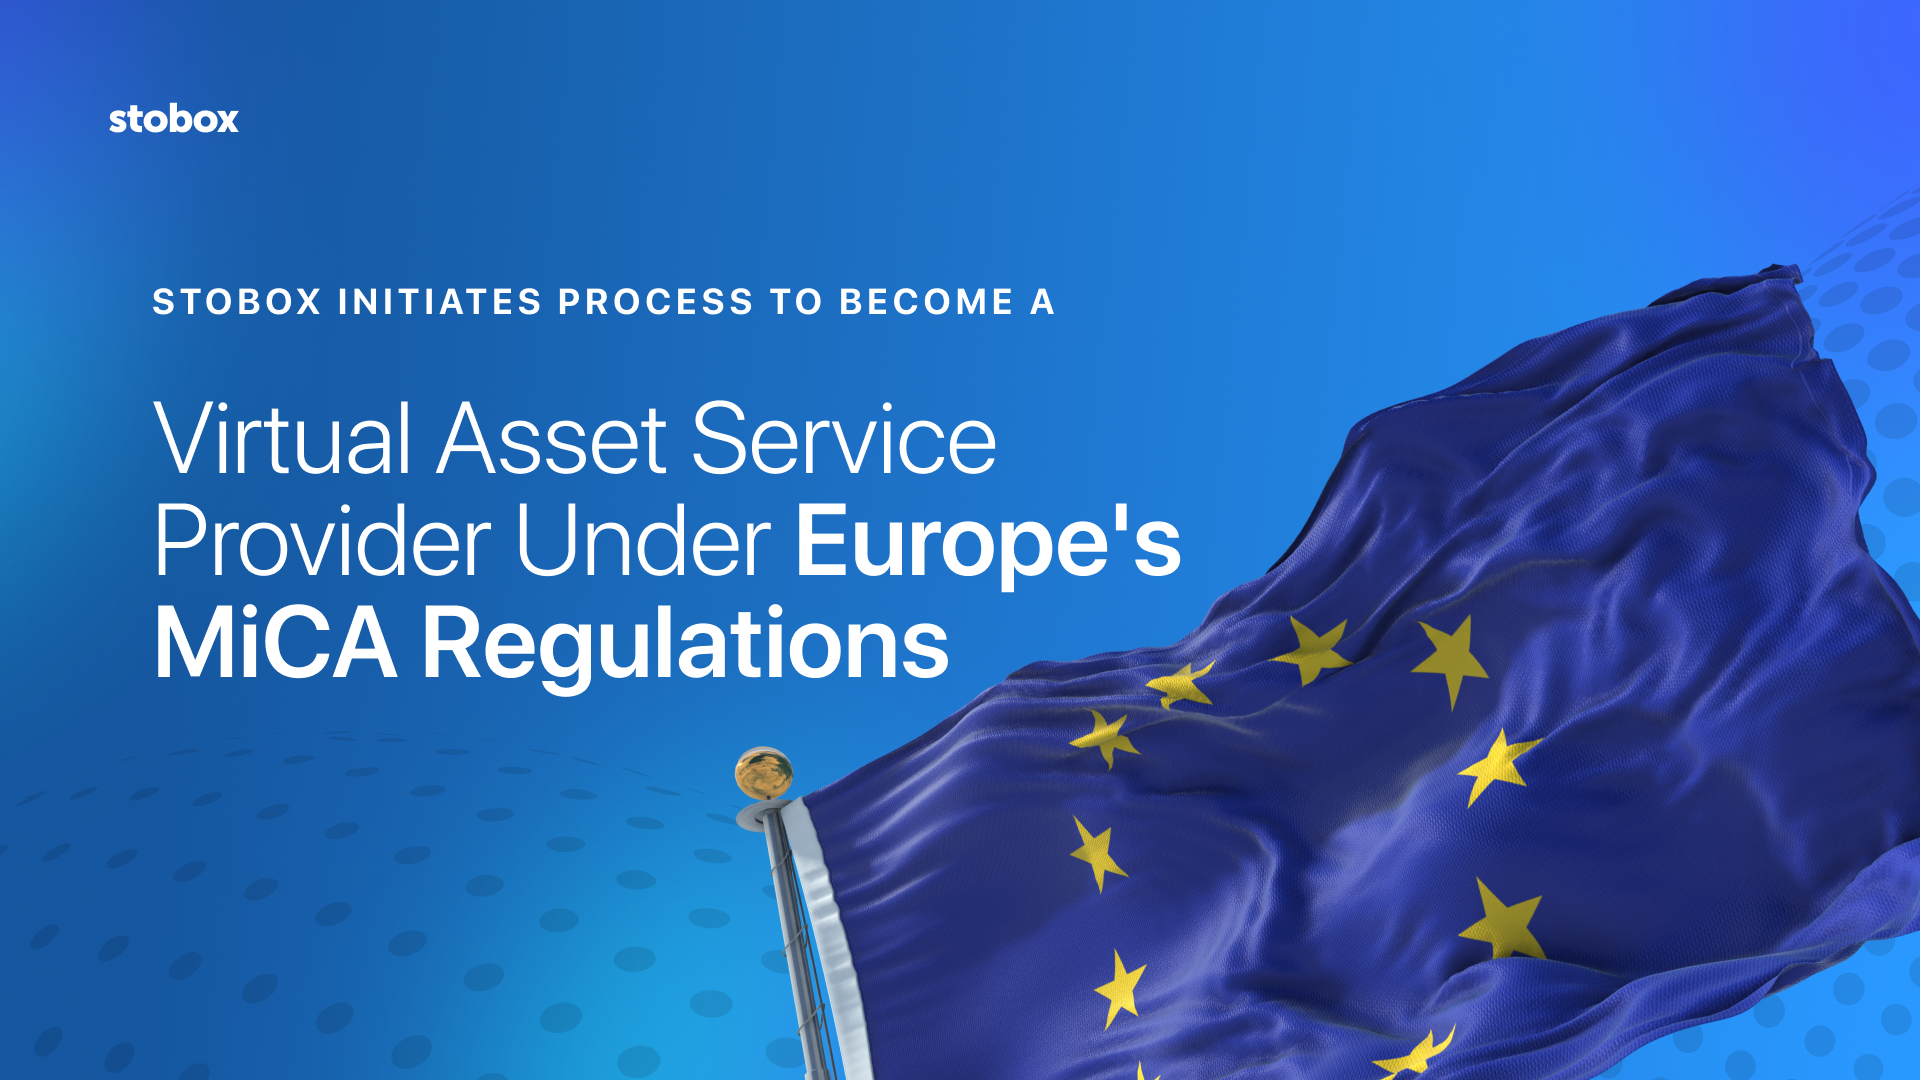 Stobox Initiates Process to Become a Virtual Asset Service Provider Under Europe's MiCA Regulations